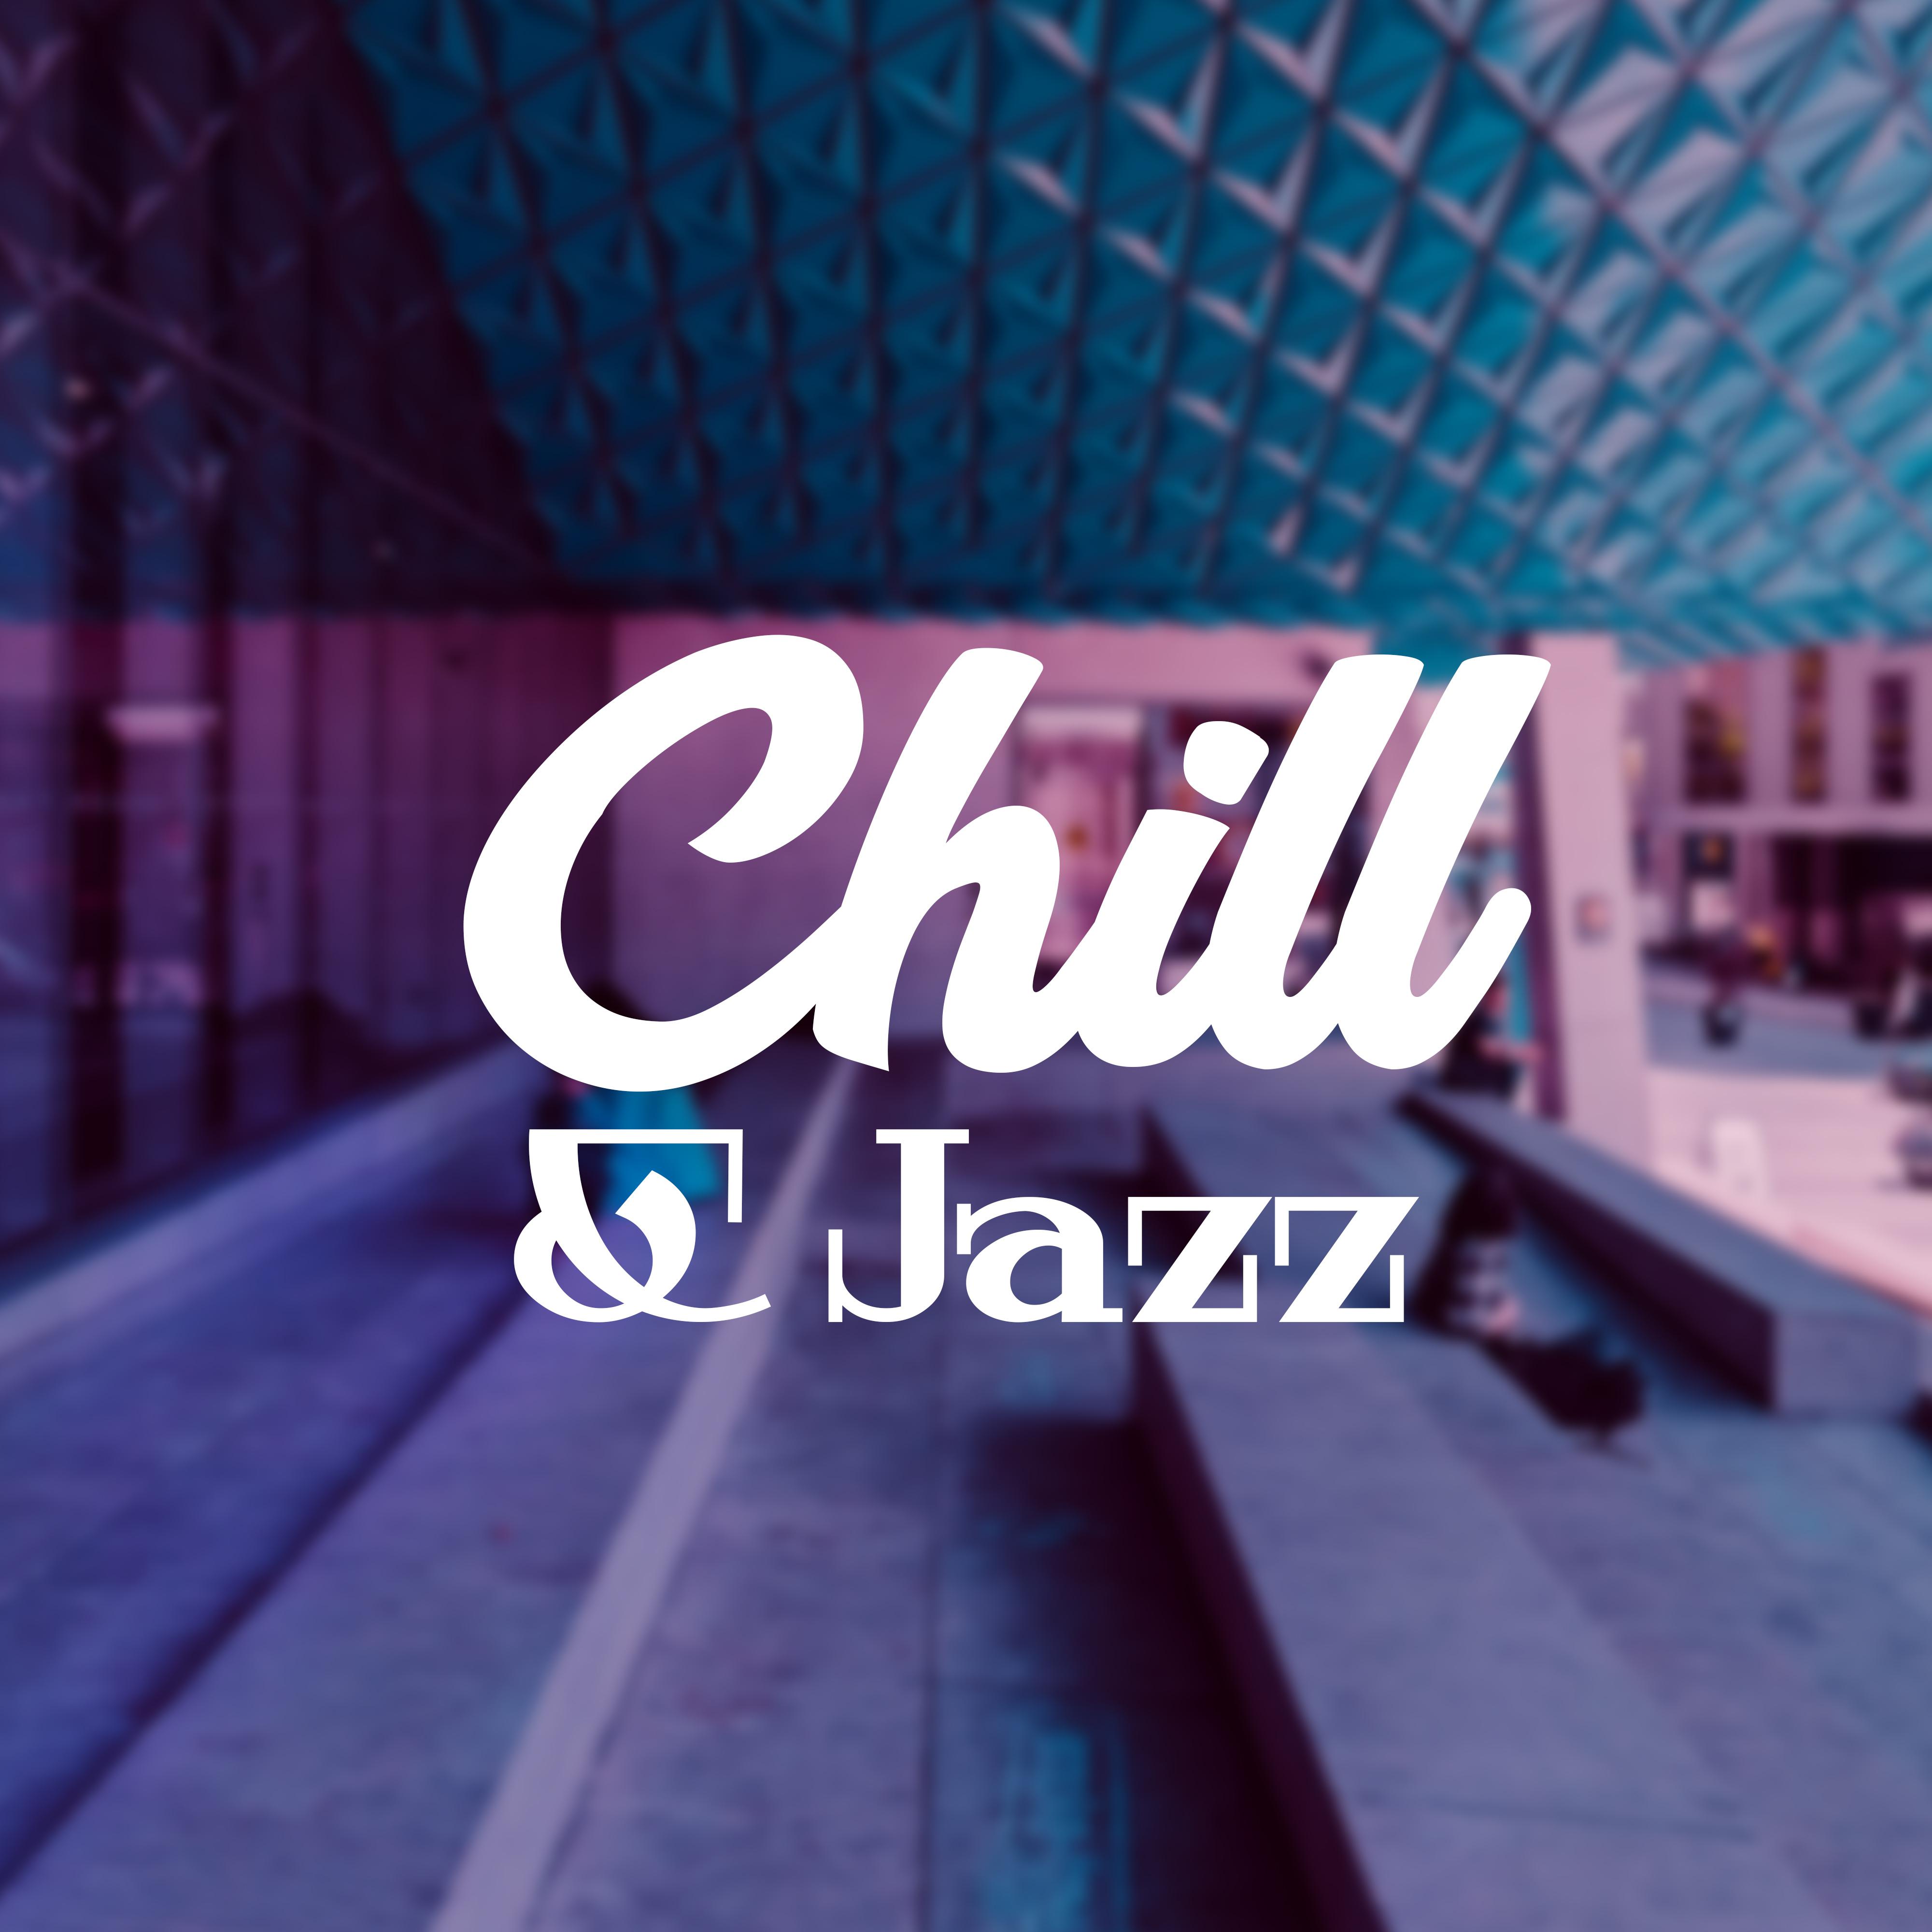 Chill  Jazz  Relaxing Music After Work, Stress Relief, Easy Listening, Calm Down, Peaceful Jazz Music